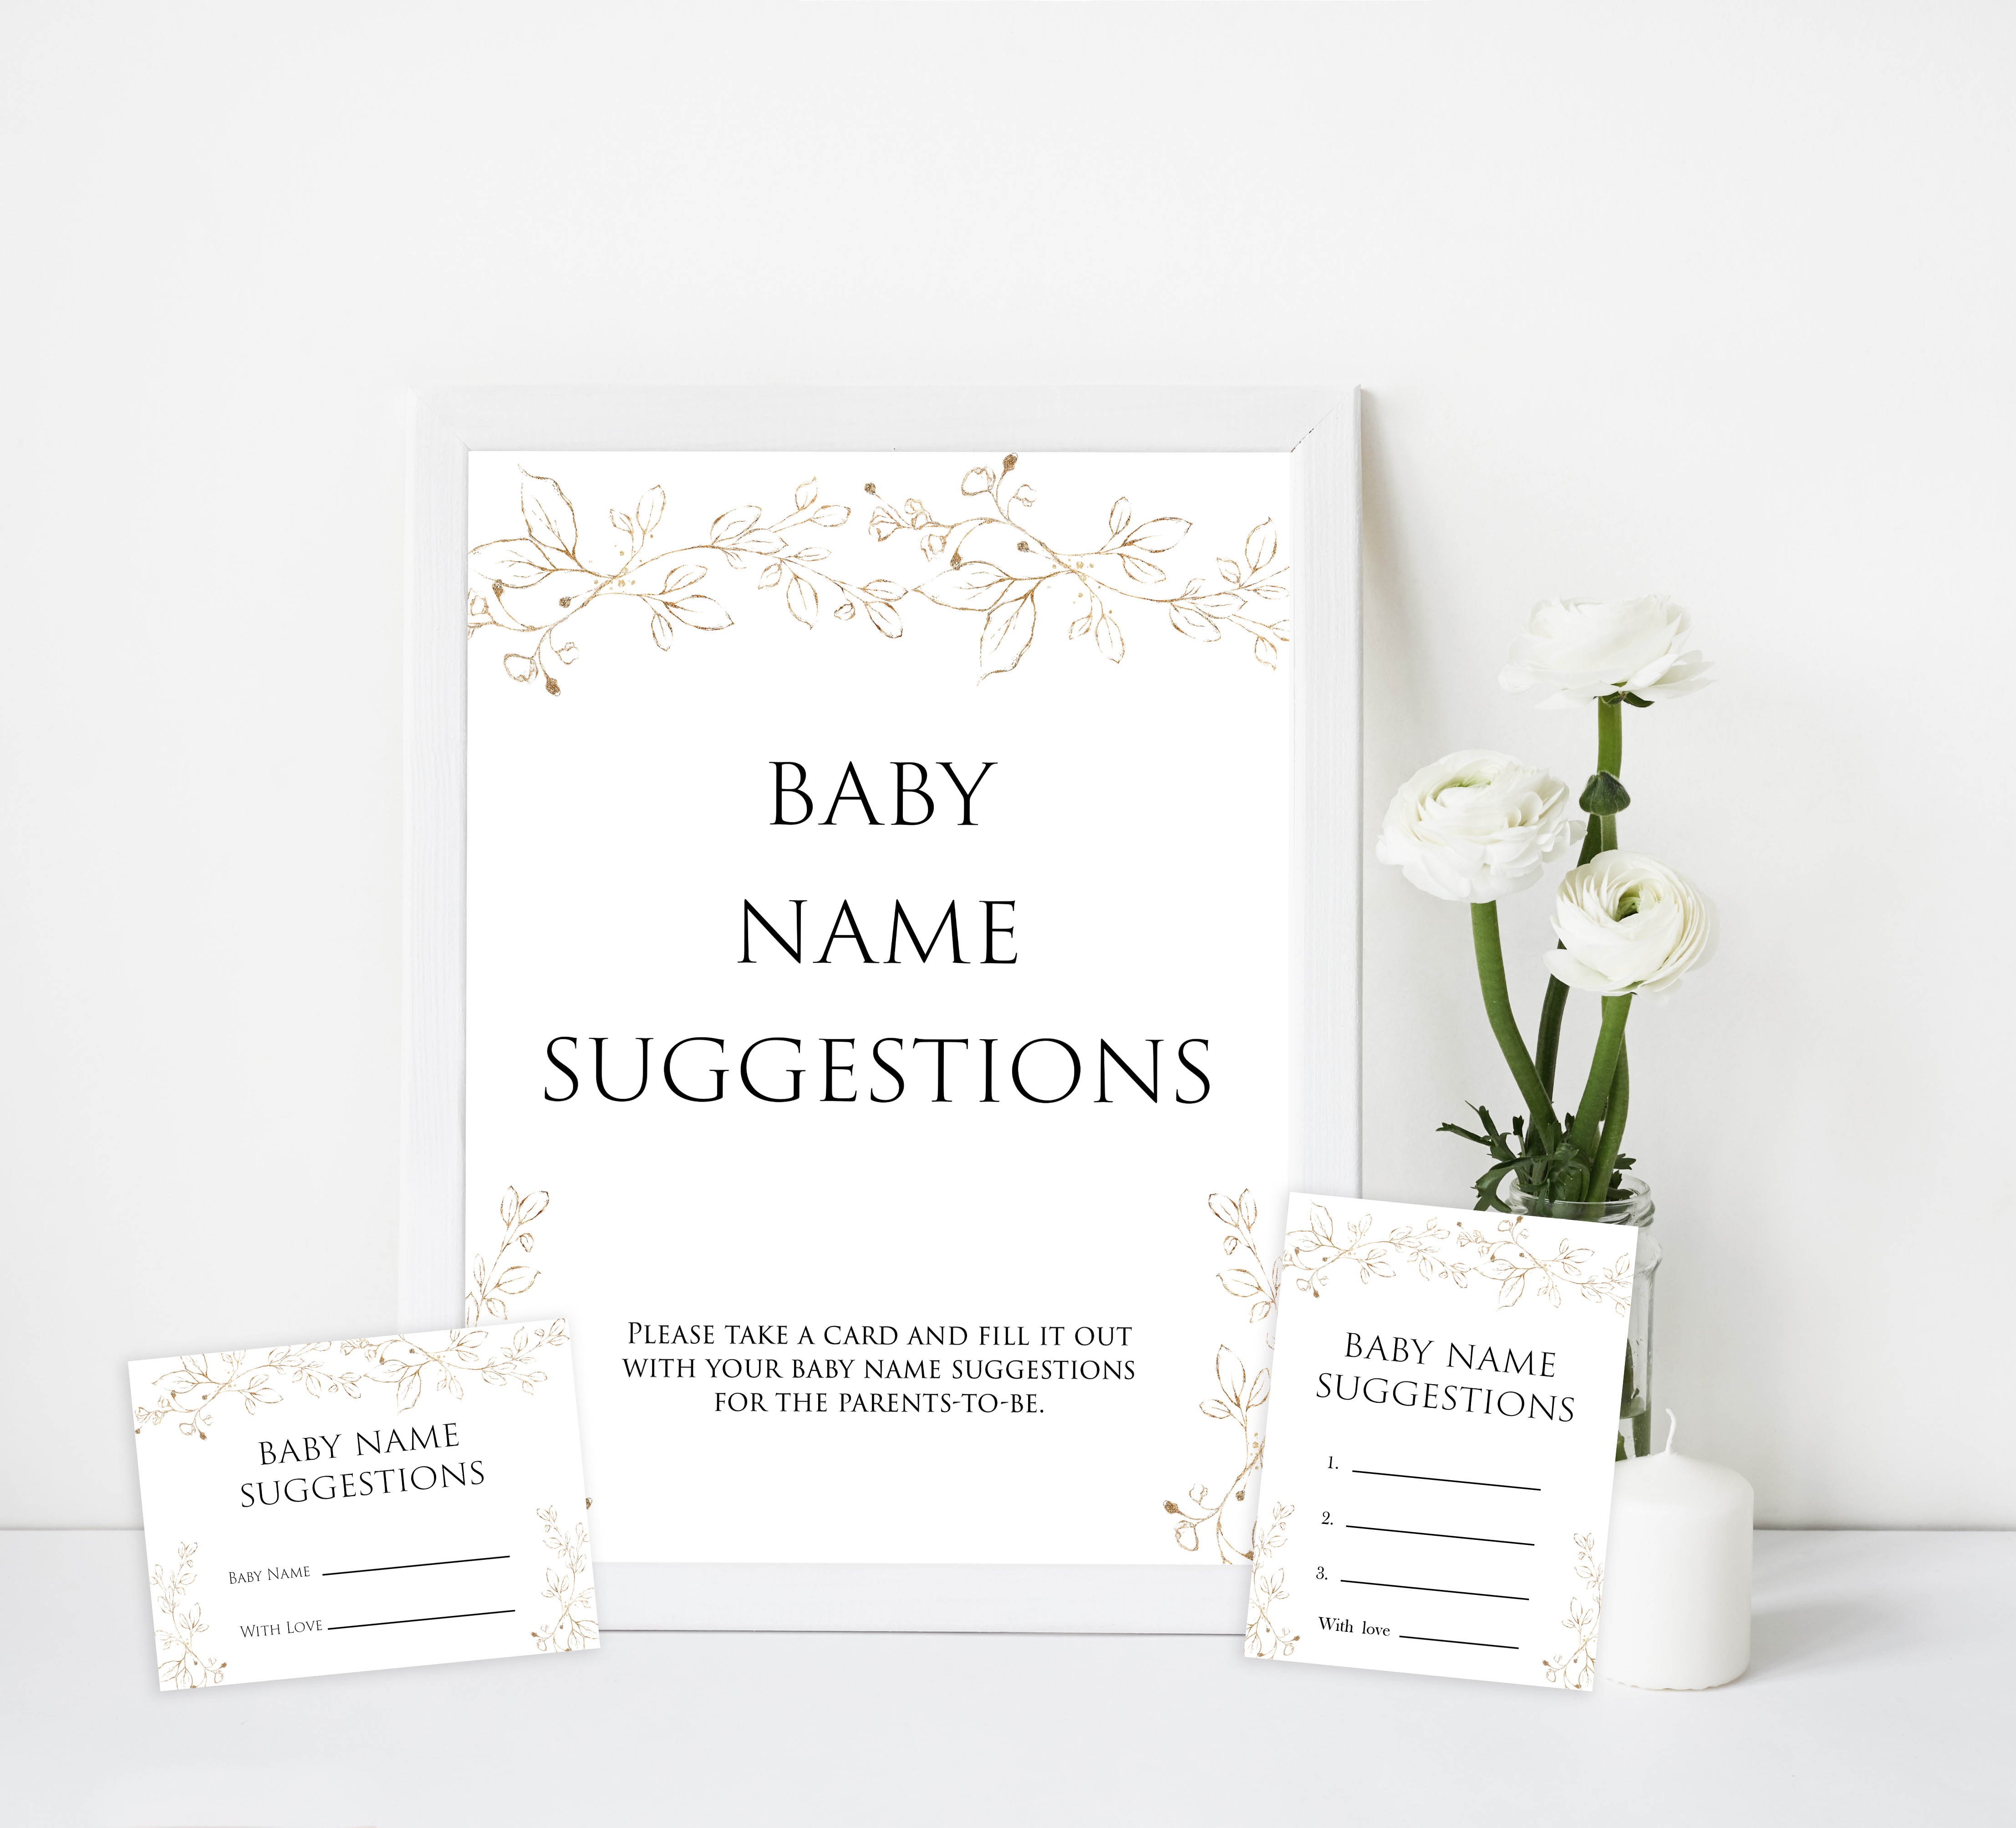 baby name suggestions game, Printable baby shower games, gold leaf baby games, baby shower games, fun baby shower ideas, top baby shower ideas, gold leaf baby shower, baby shower games, fun gold leaf baby shower ideas